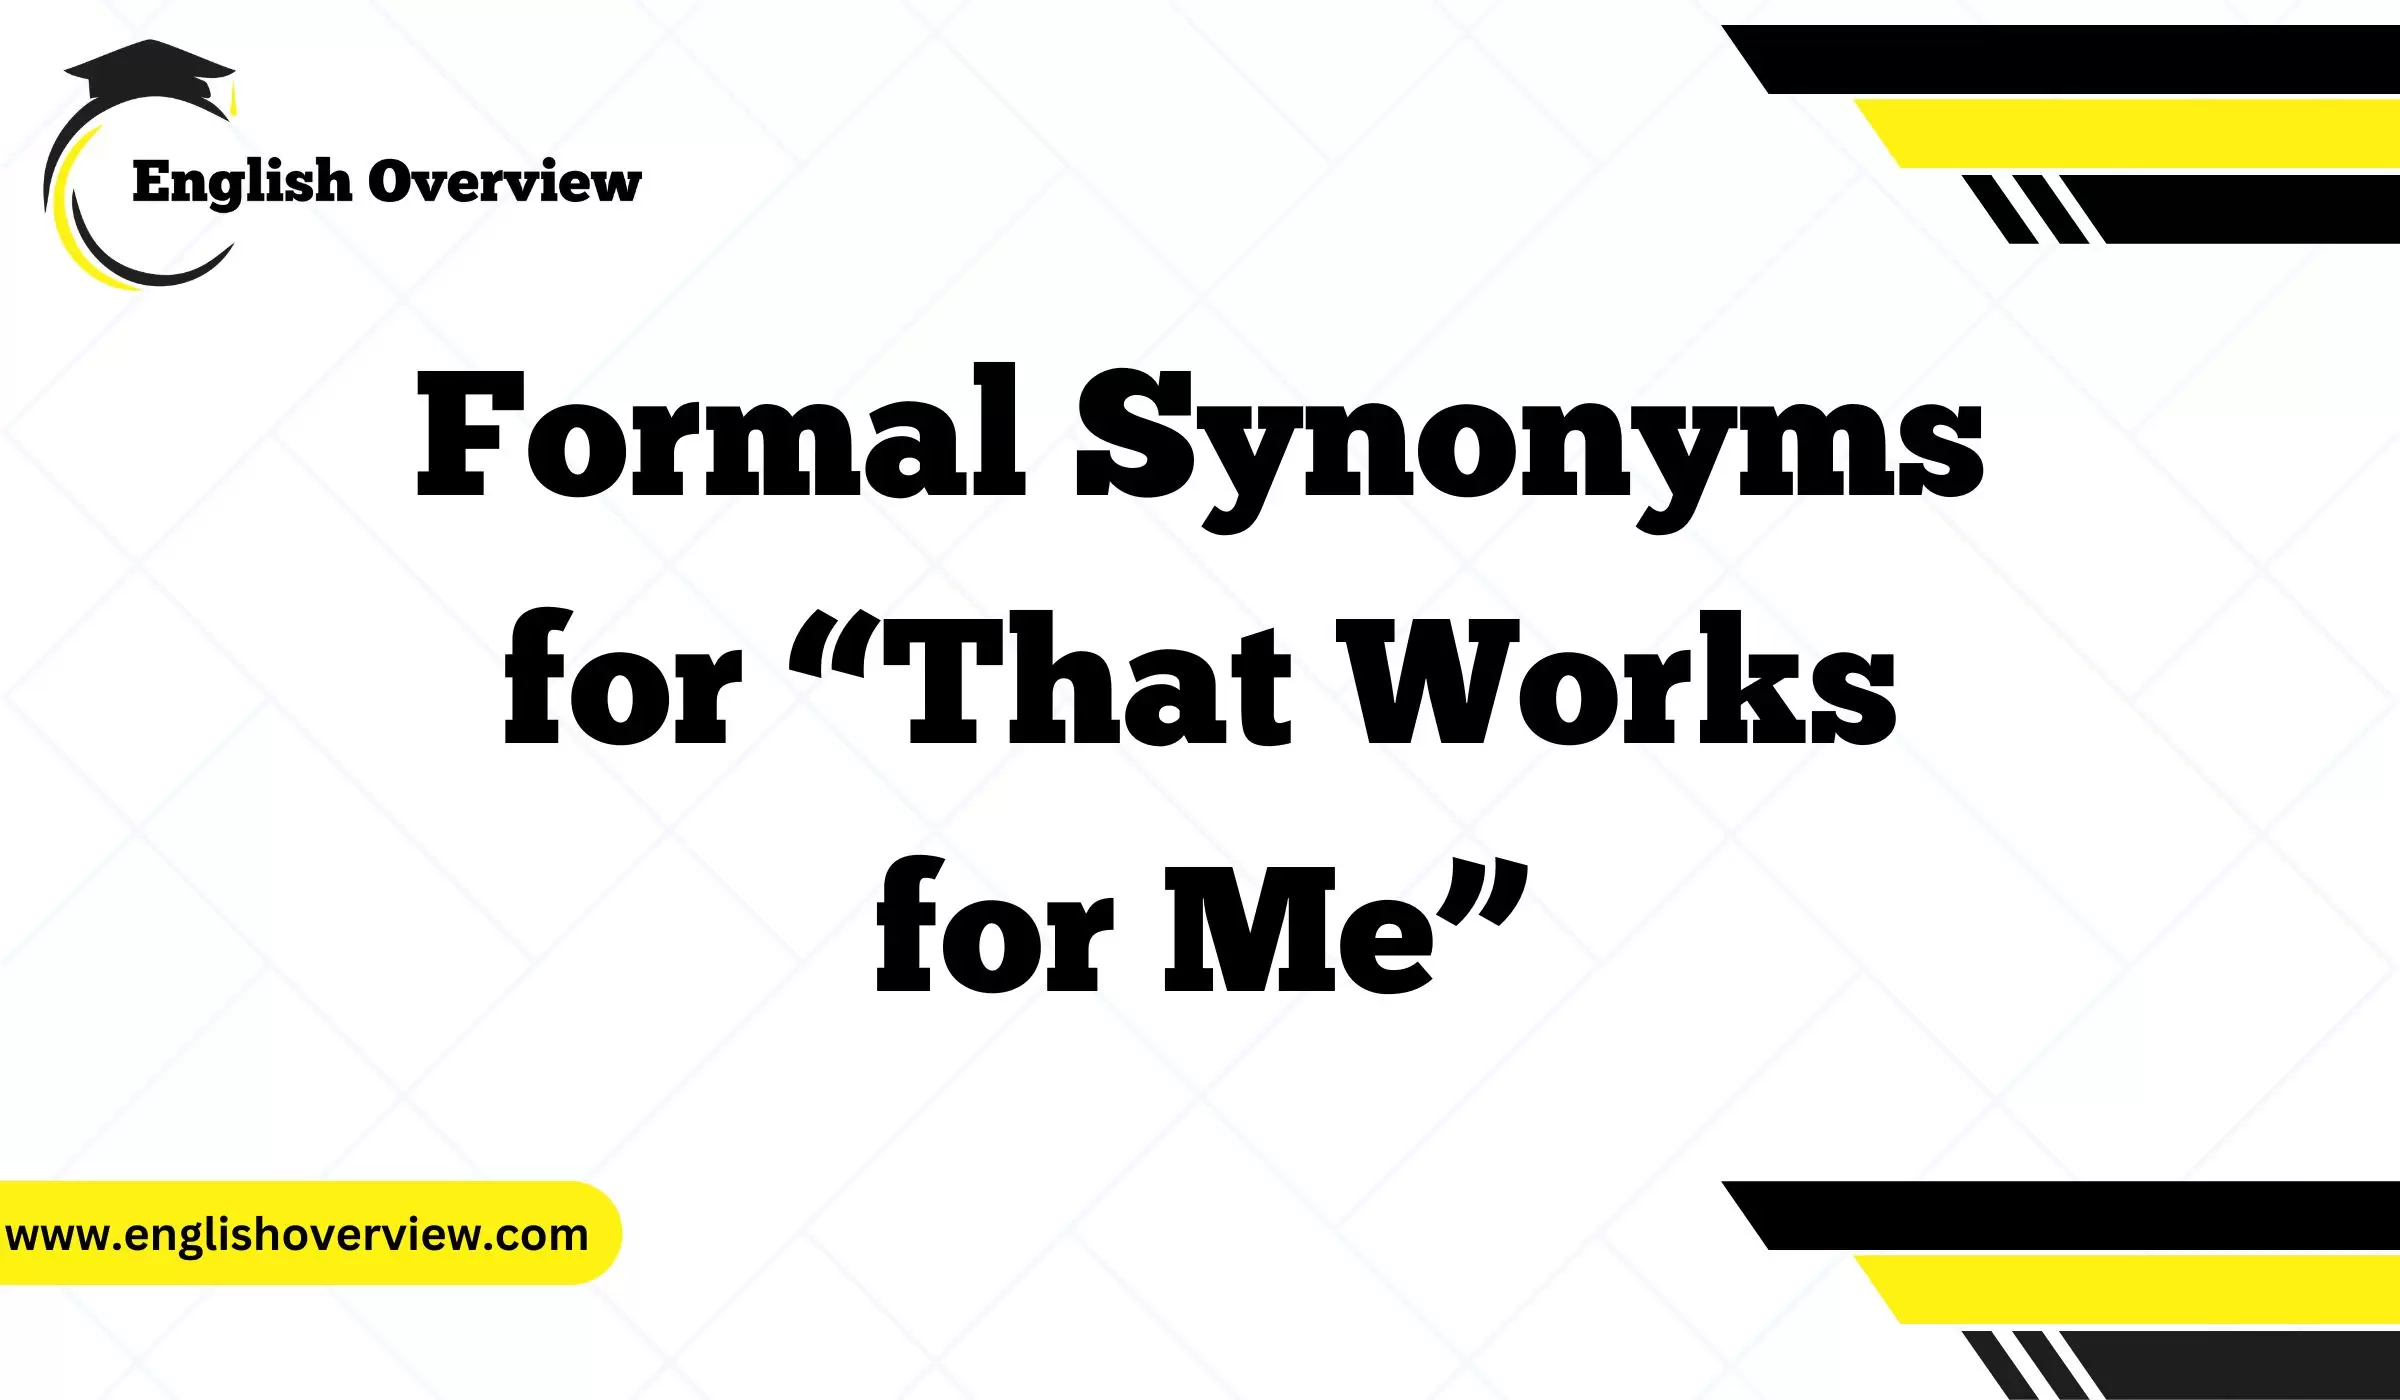 Formal Synonyms for “That Works for Me”